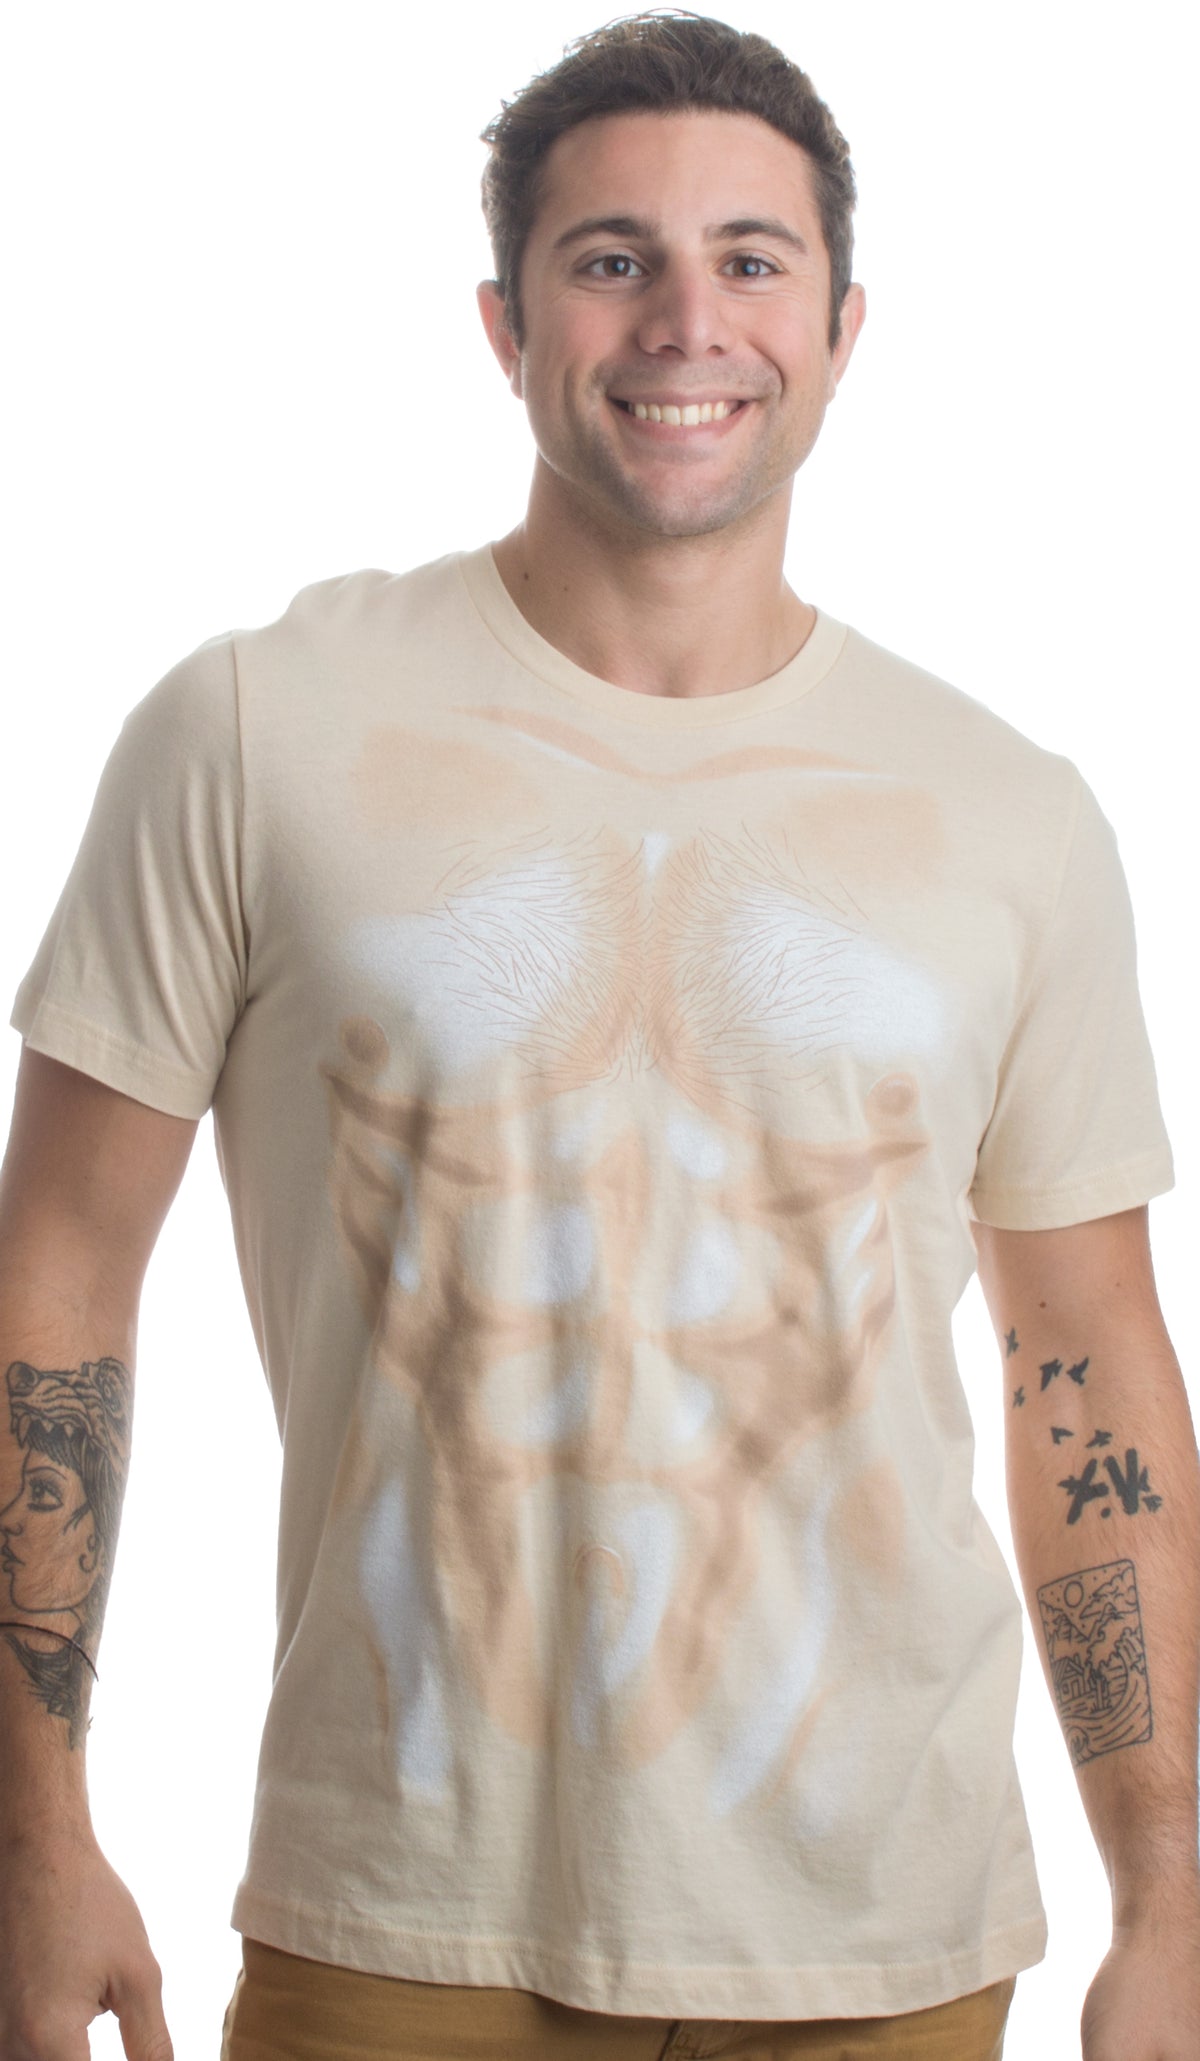 Muscle Man | Funny Halloween Costume Sexy Shirtless Man Costume Unisex T-shirt